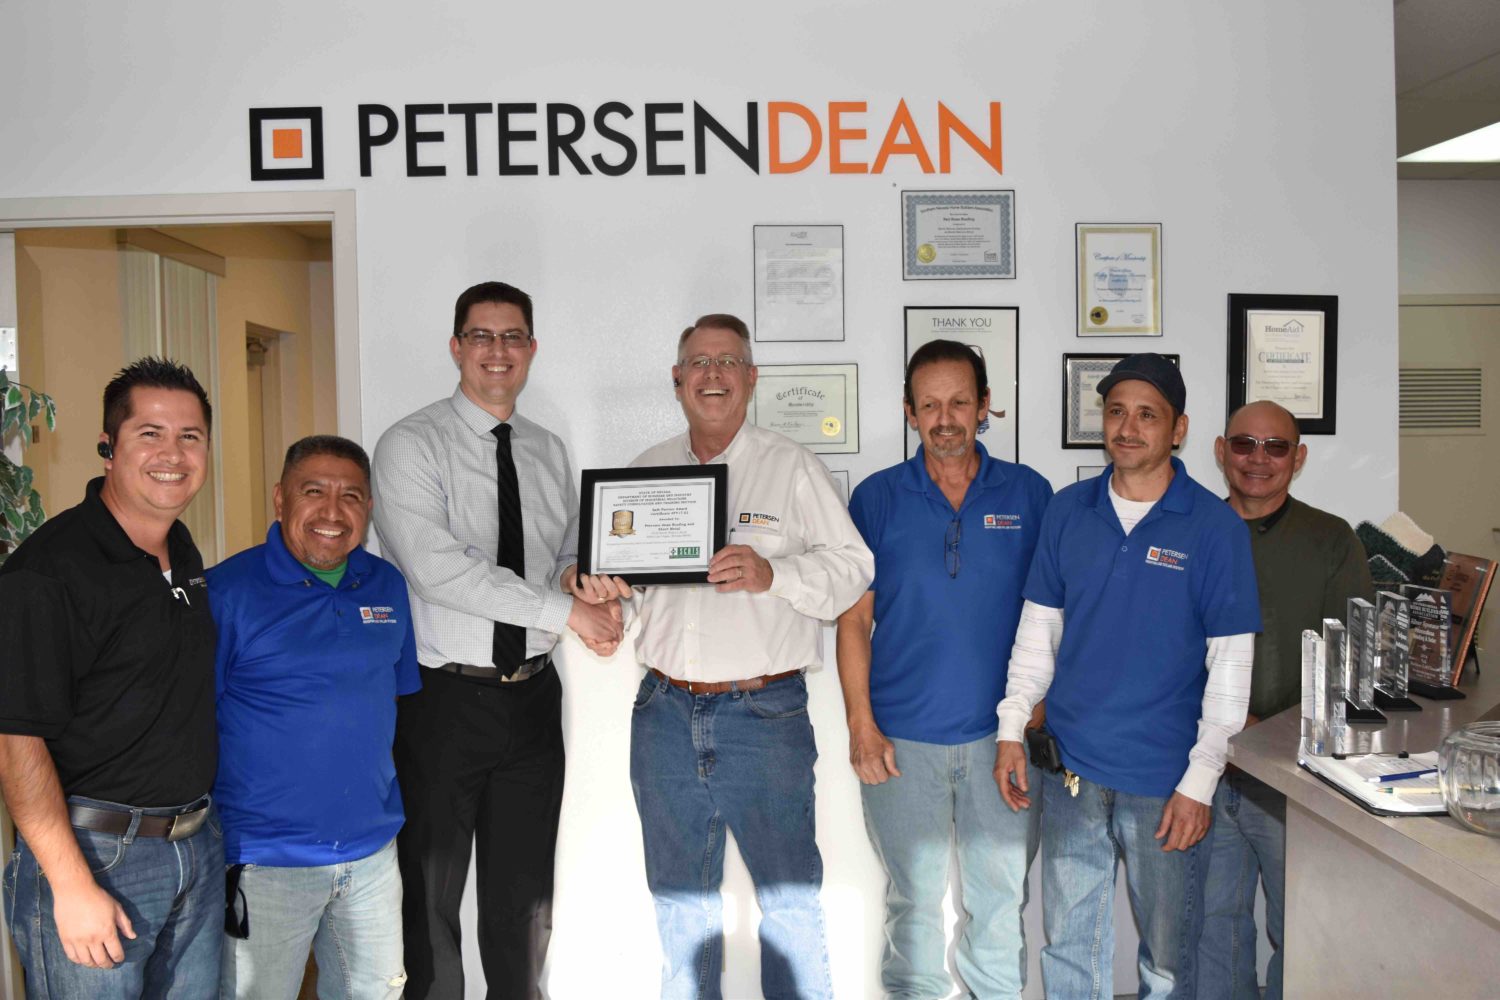 SCATS of the State of Nevada Division of Industrial Relations recognized PetersenDean Roofing and Solar with the Safe Partner Award.